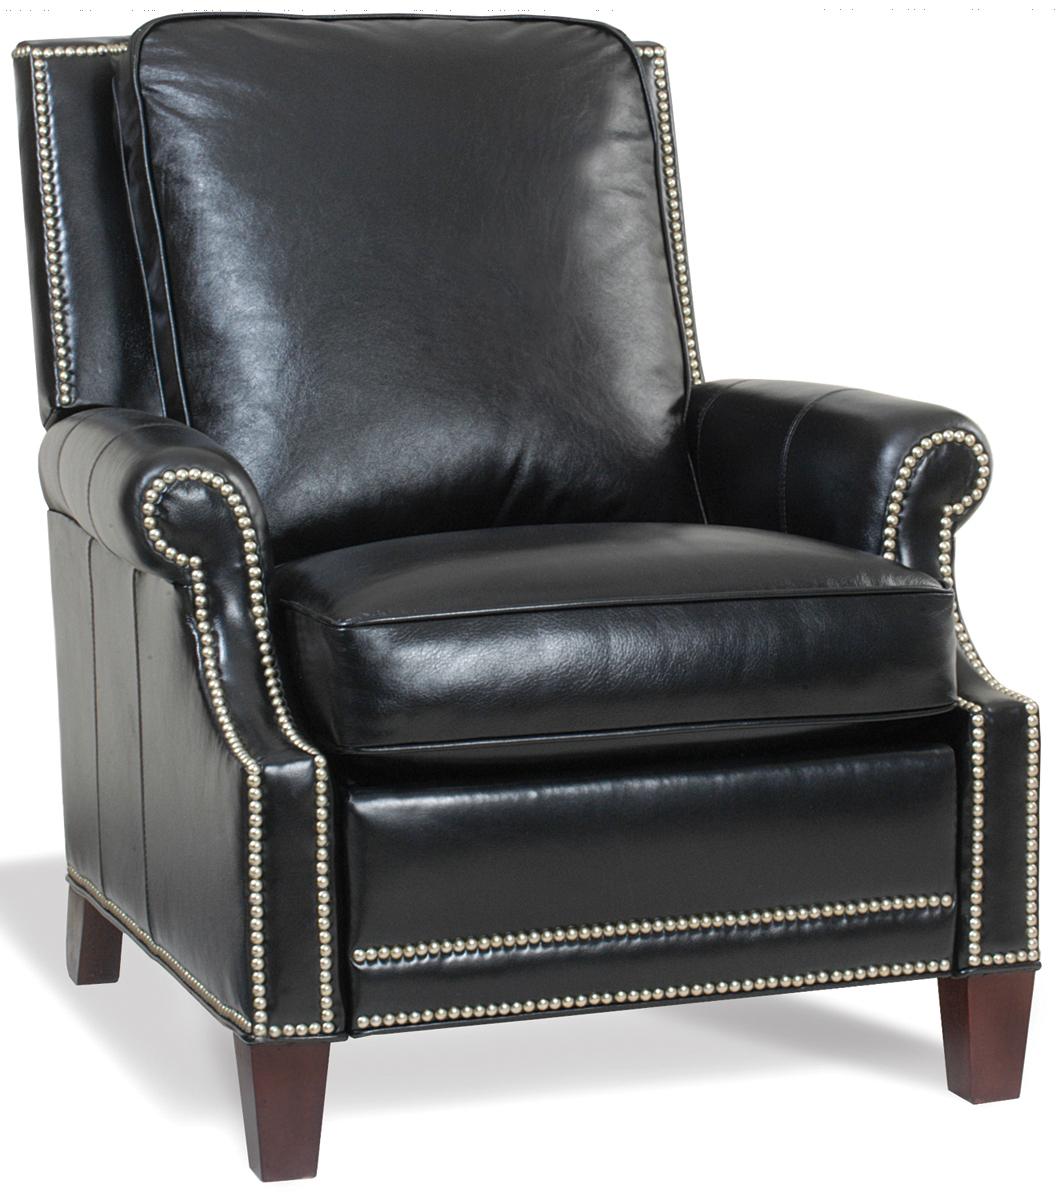 Transitional Push Back Recliner with Nailhead Trim